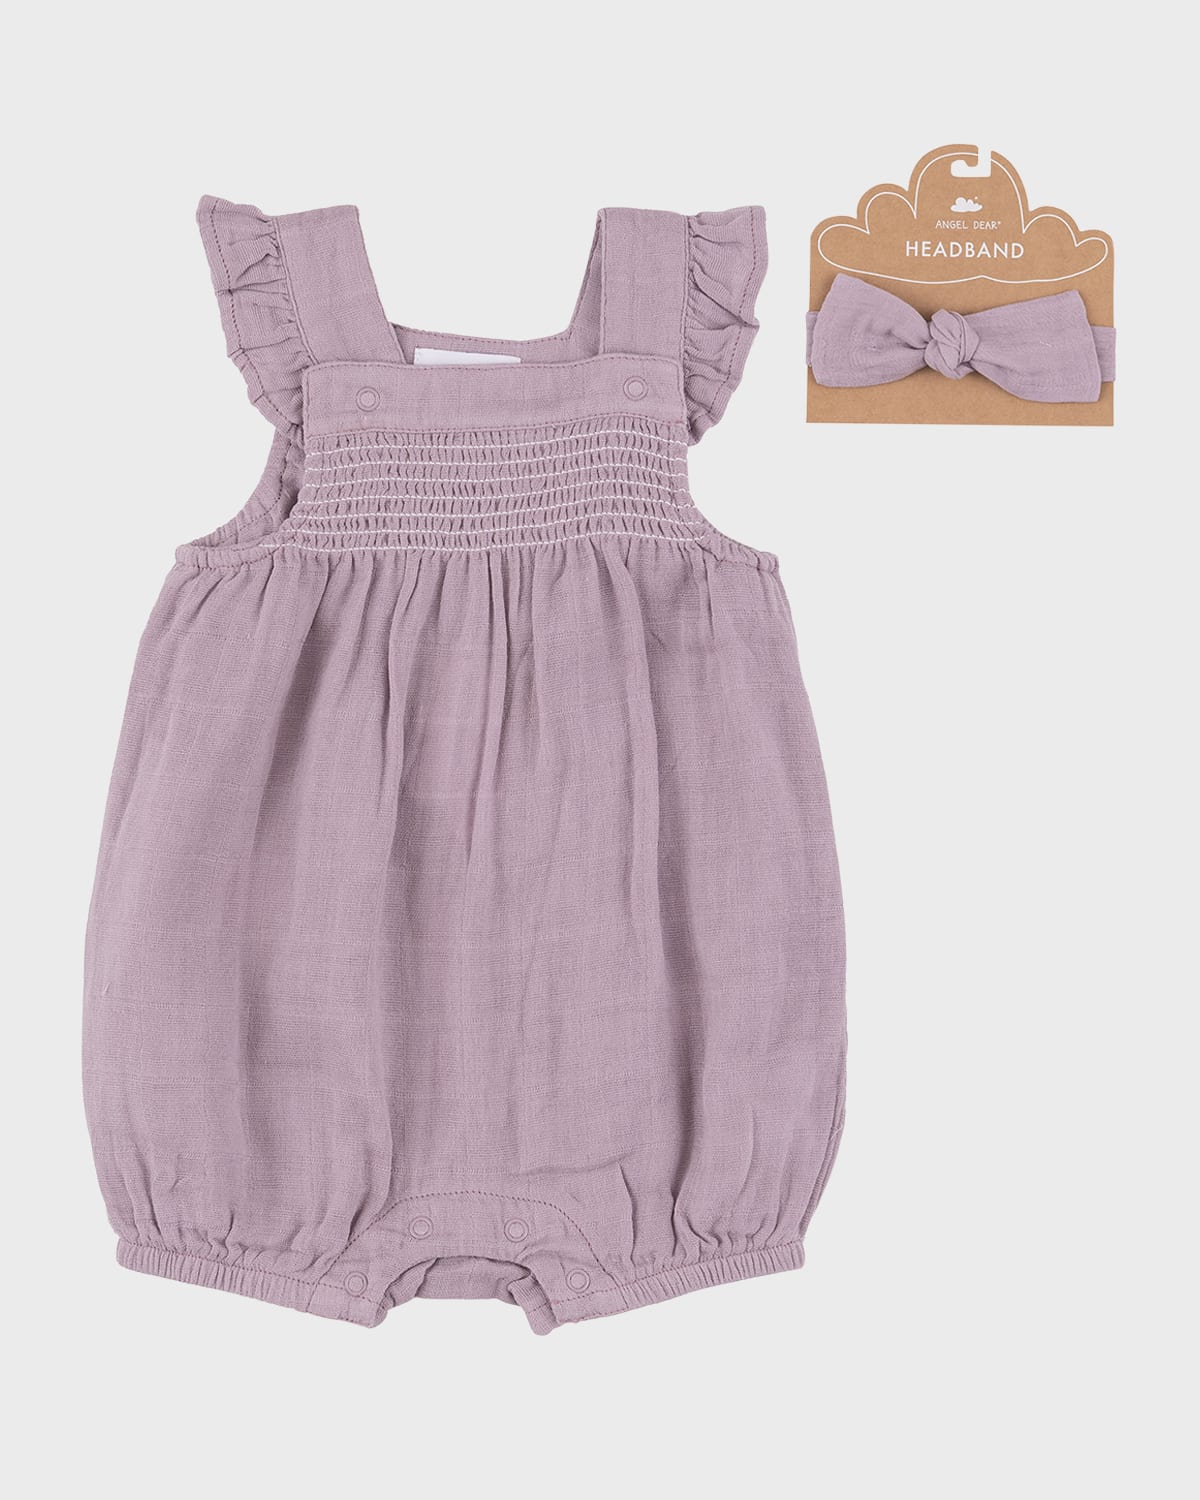 Angel Dear Kids' Girl's Dusty Lavender Smocked Dungarees And Headband Set